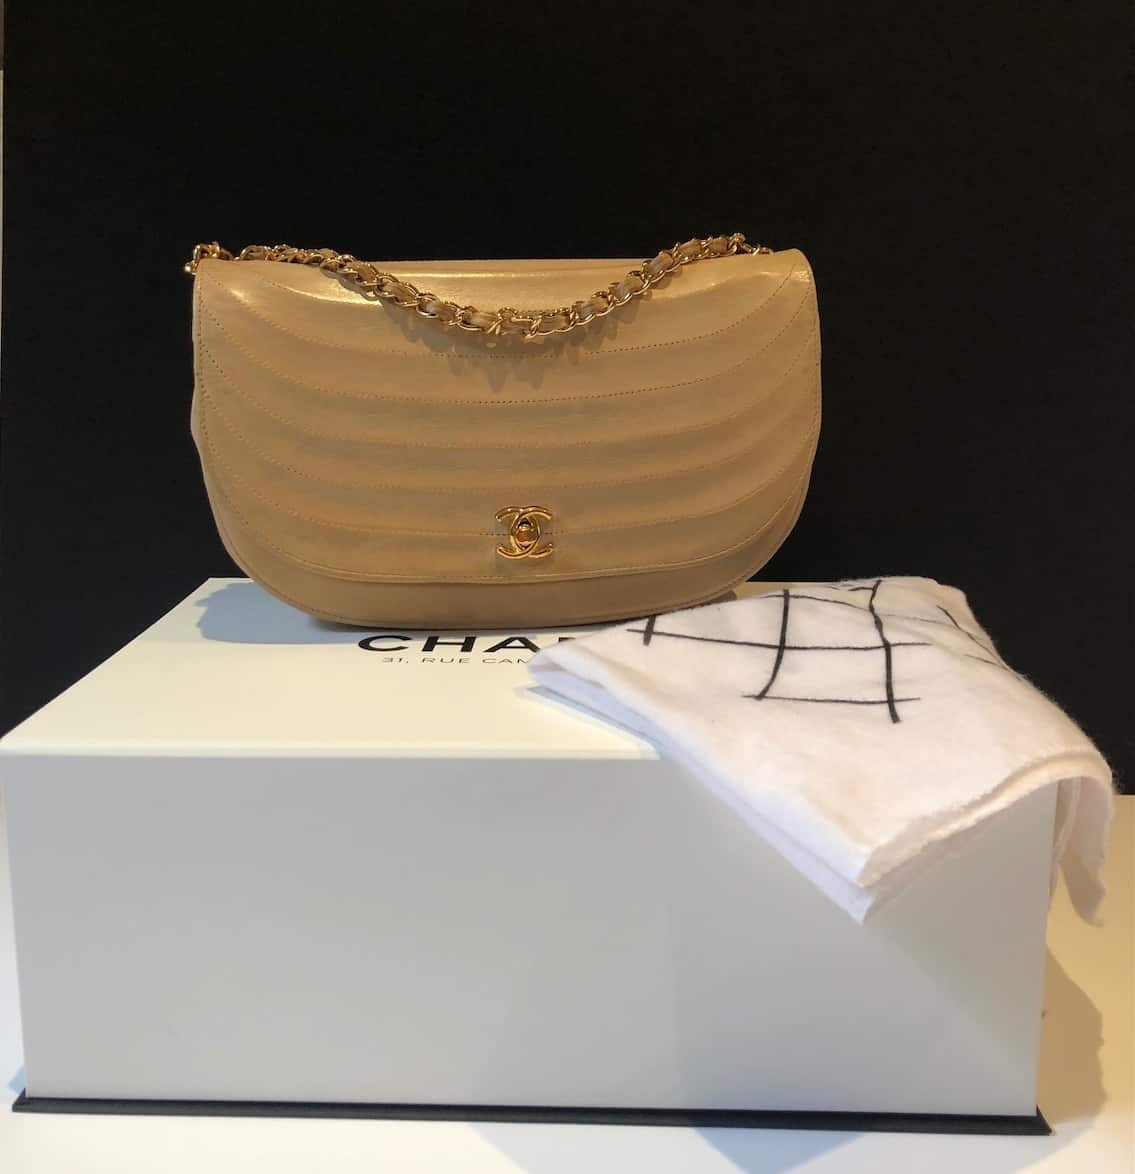 CHANEL Beige Two-tone Quilted Leather Flap Bag Circa 1970s at 1stDibs